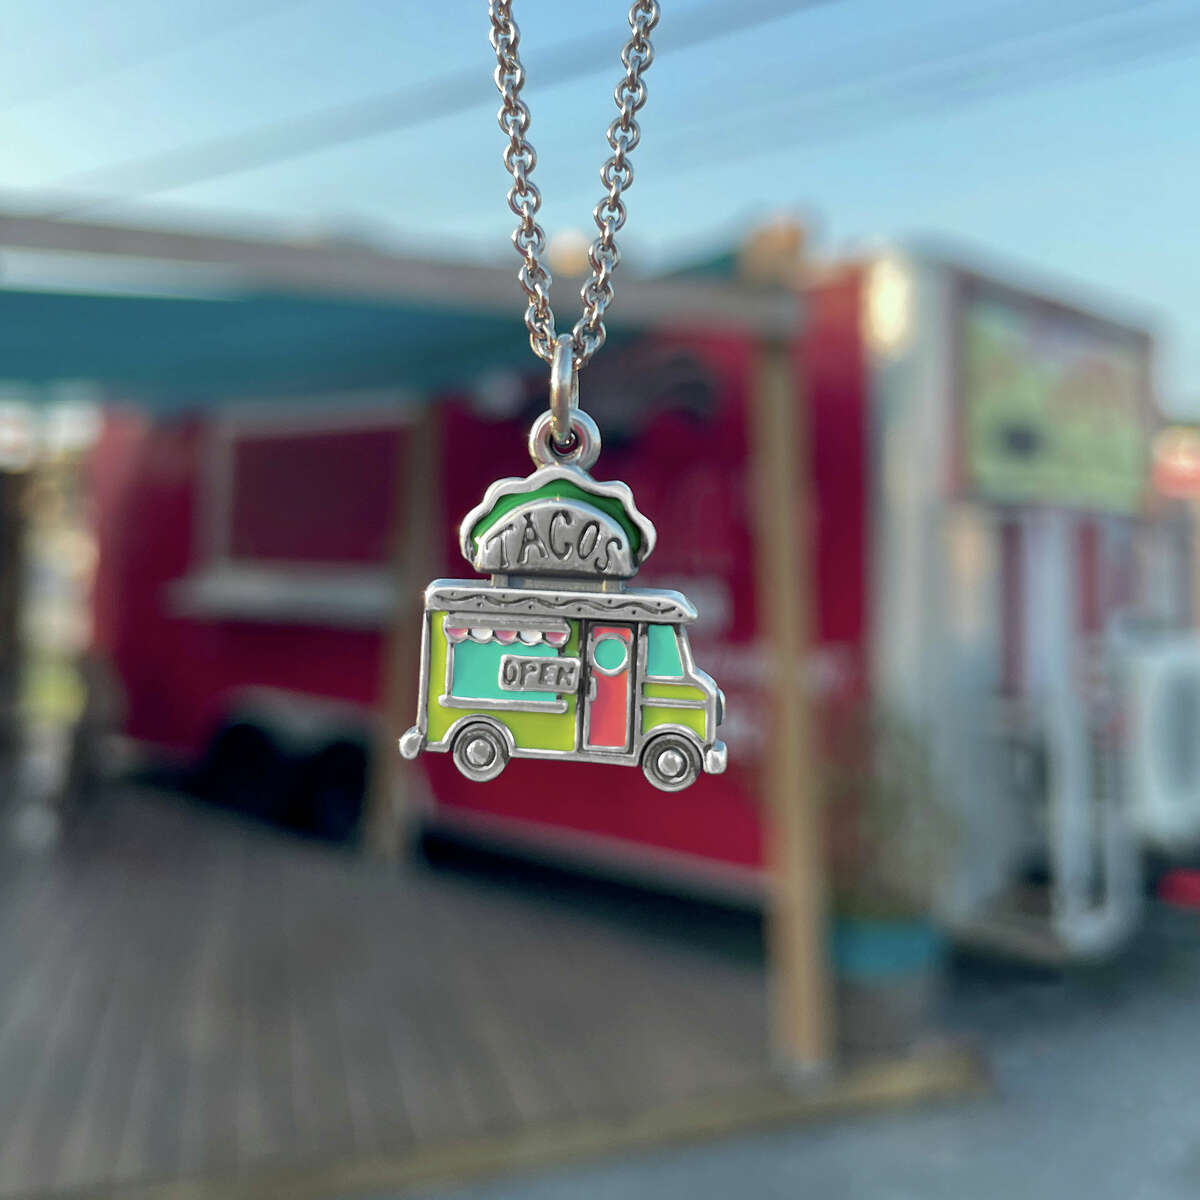 James Avery Artisan Jewelry released a set of Tex-Mex-themed charms on June 20 that are already a hit with customers. 